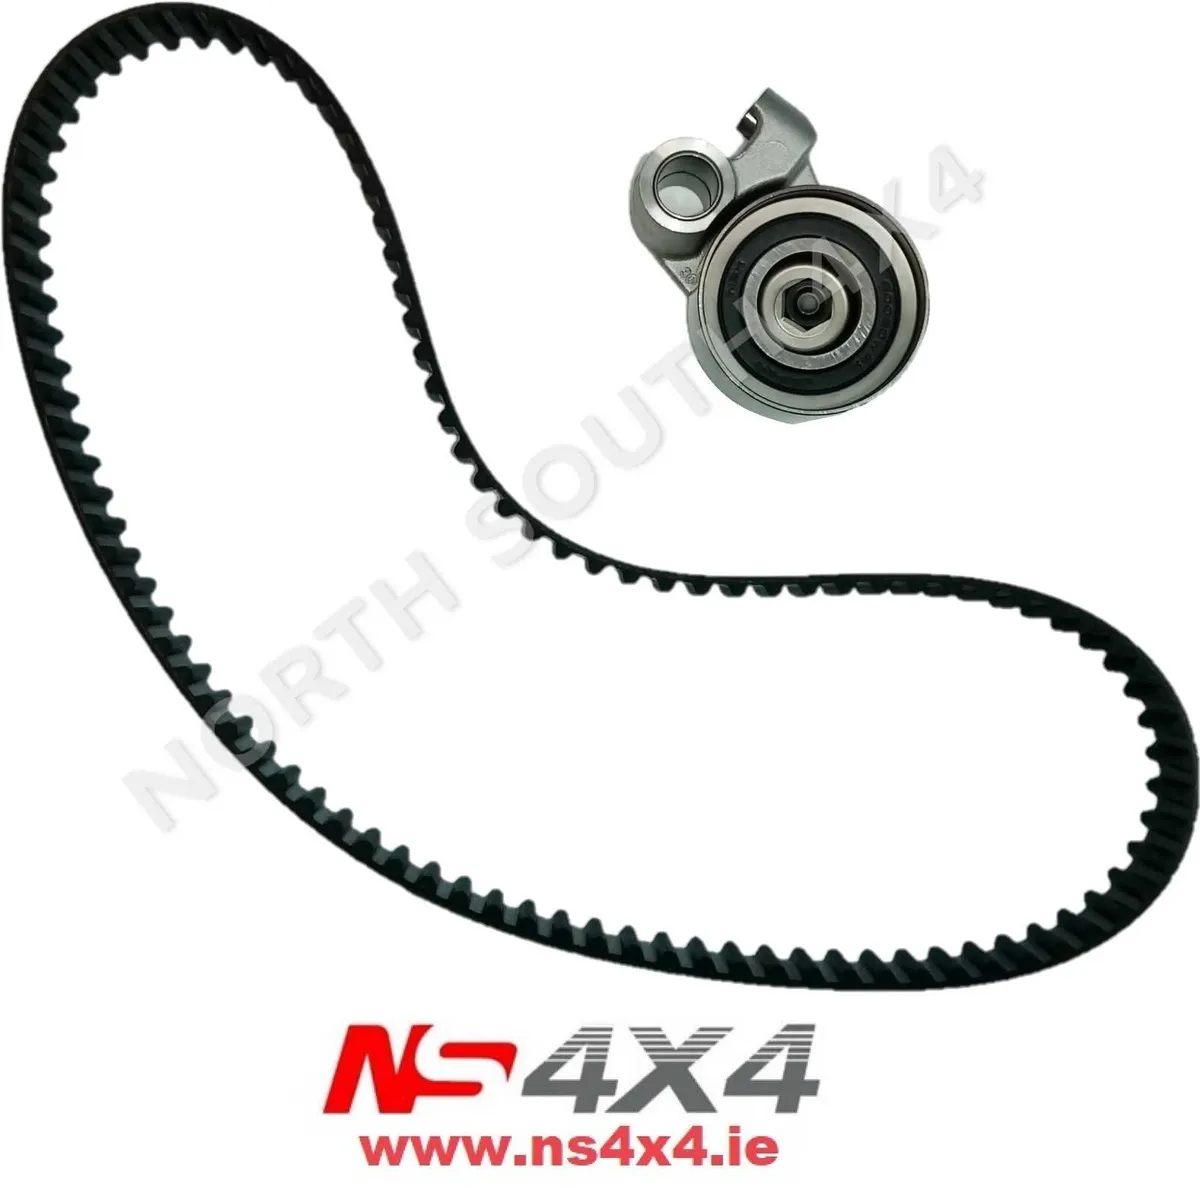 Timing Belt Kit for Toyota Hilux *All Spares*